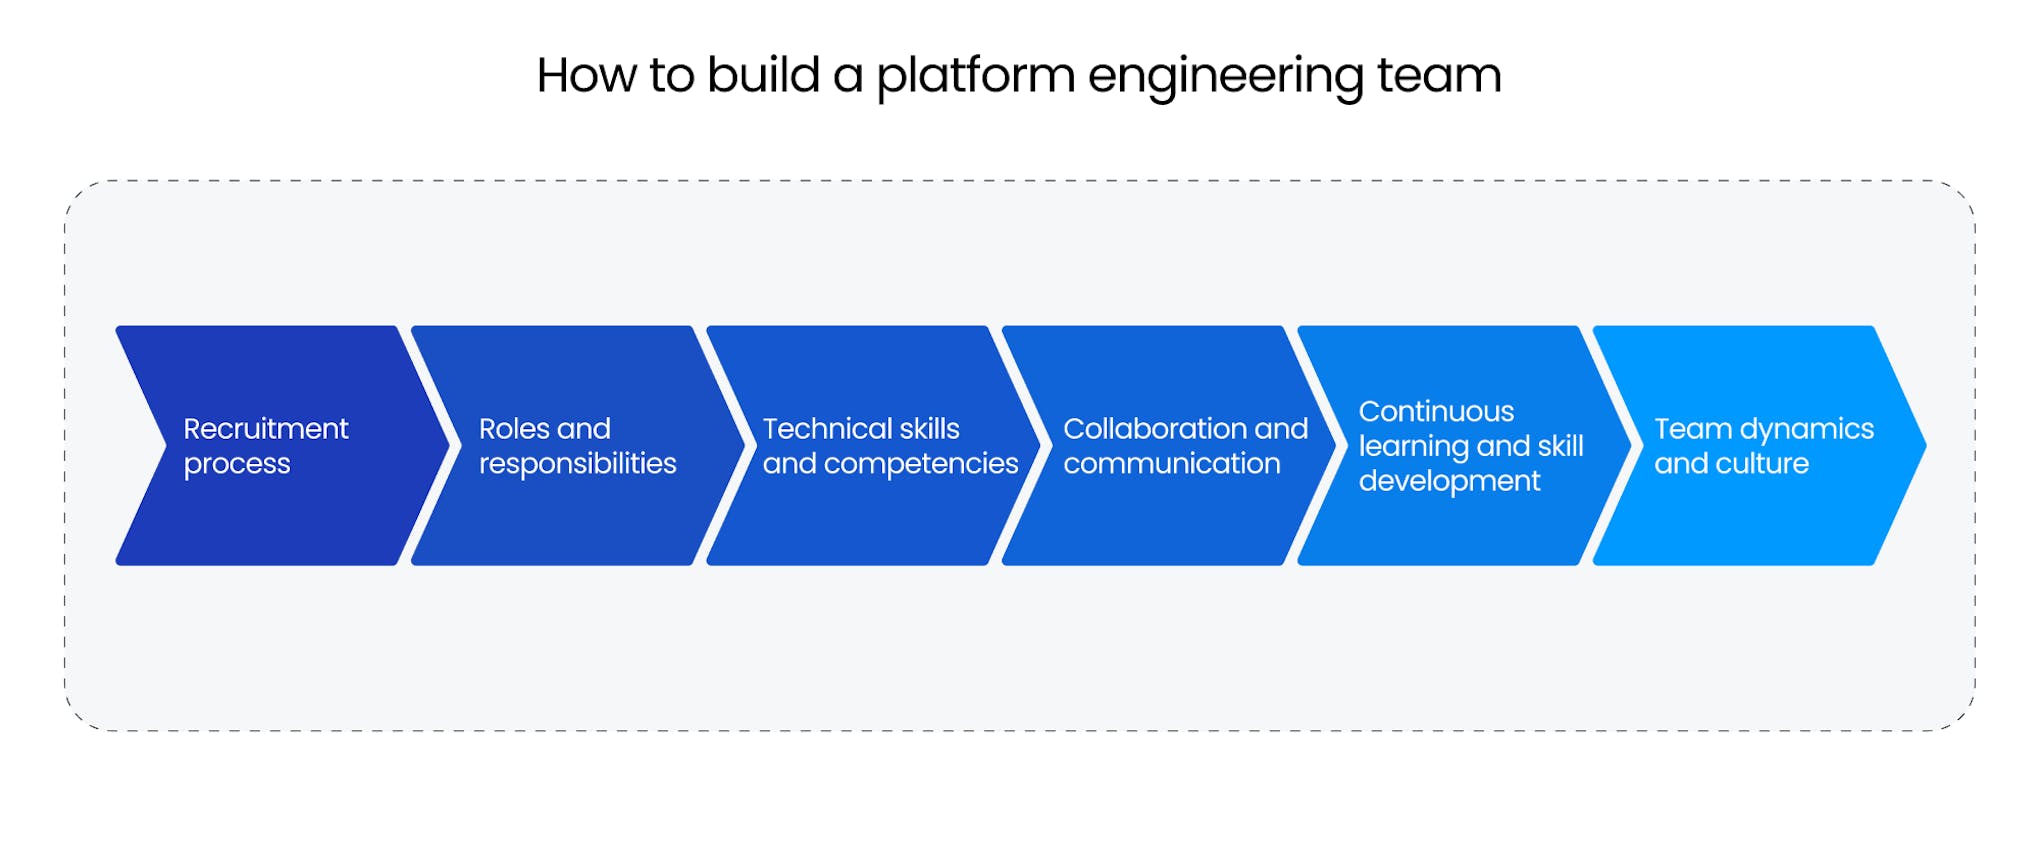 How to build a platform engineering team